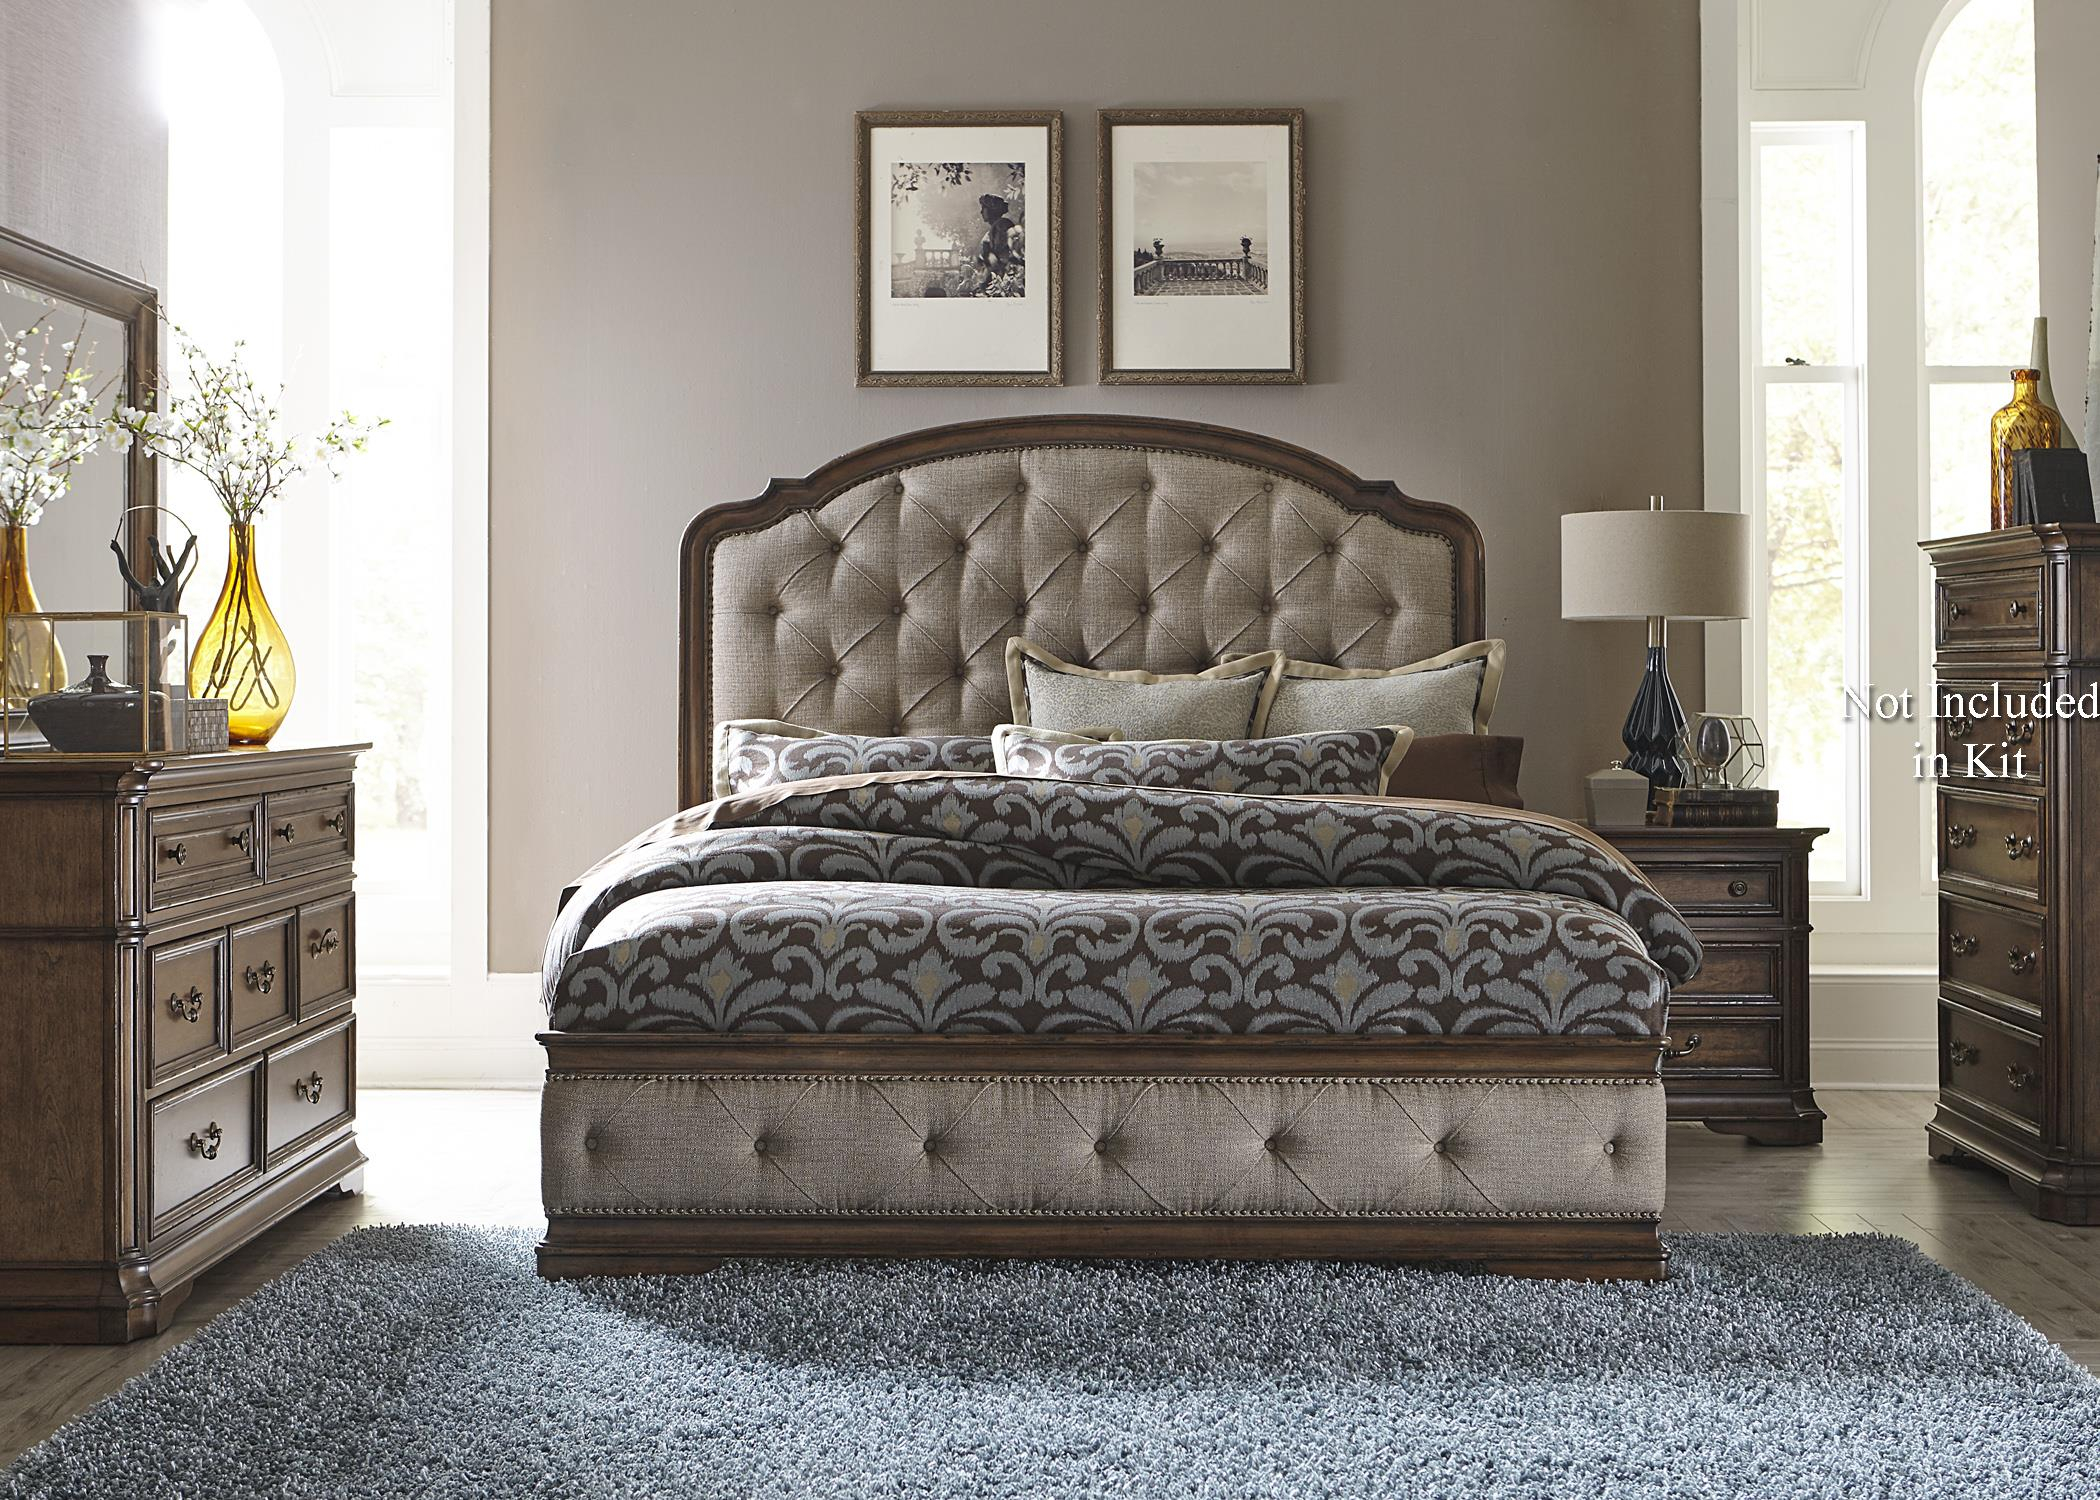 Amelia Queen Bedroom Group Liberty Furniture At Furniture And Appliancemart intended for proportions 2100 X 1500